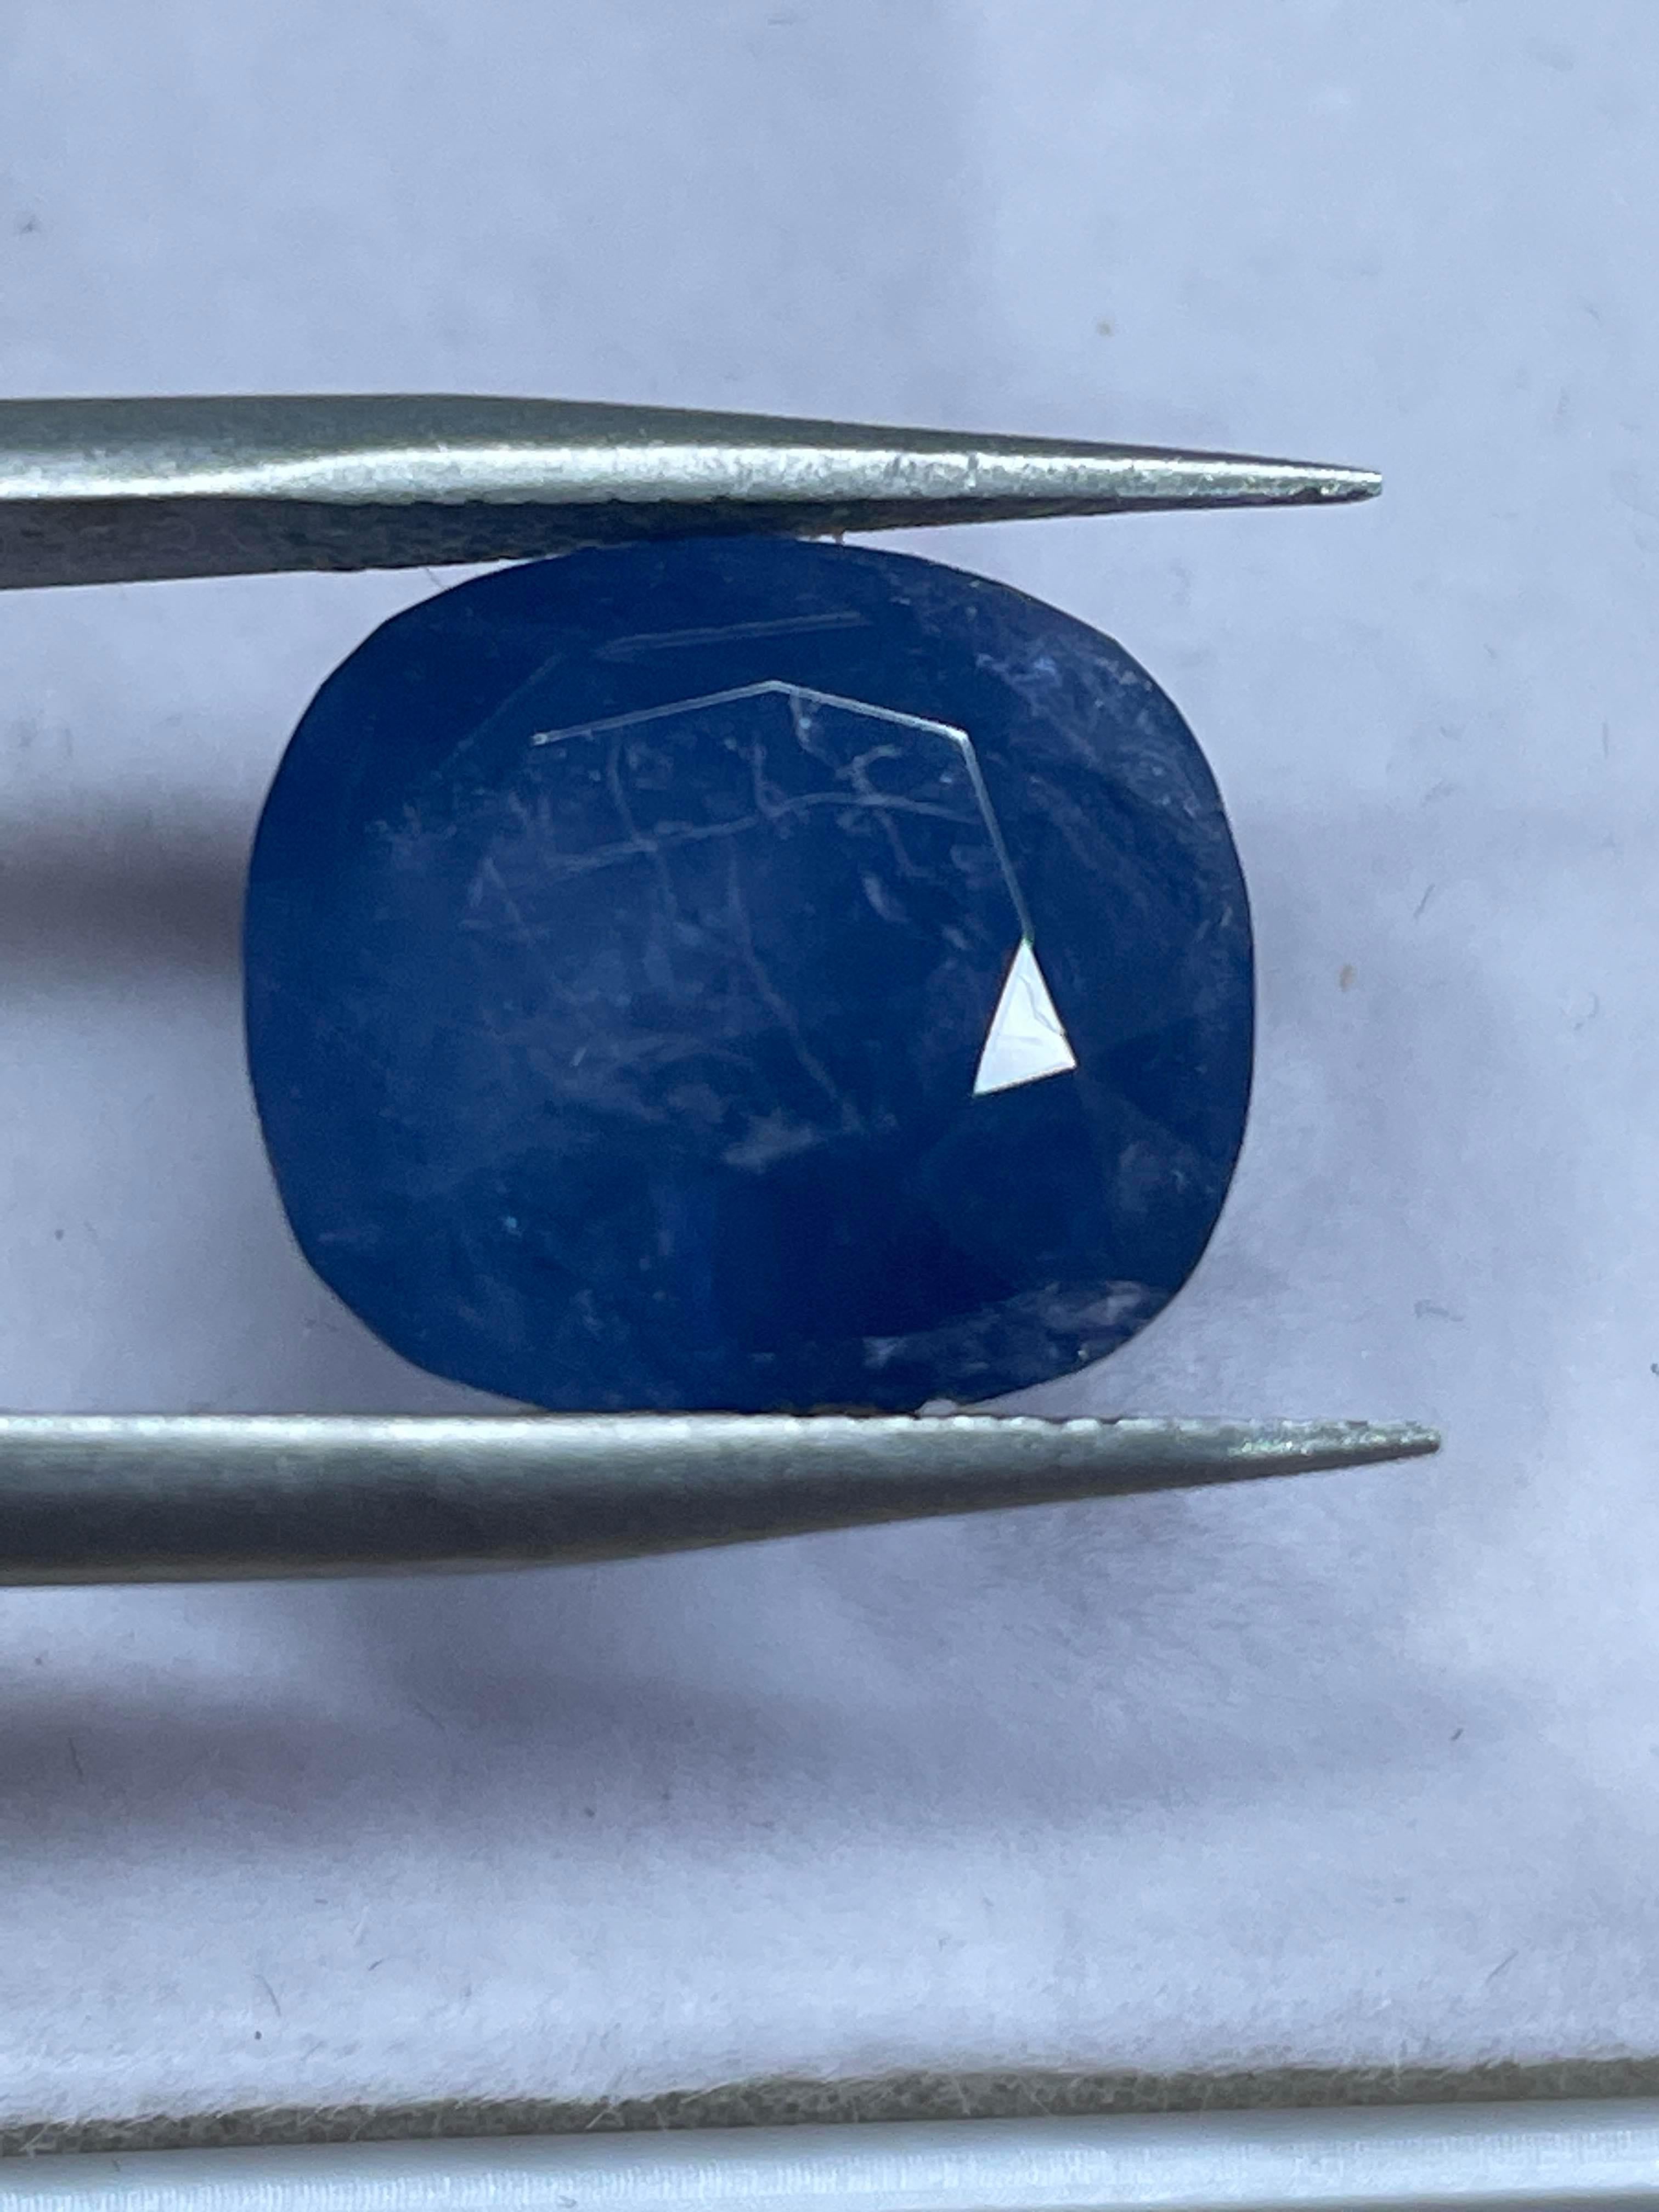 A Burmese blue sapphire of 12 carat size is a rare and stunning gemstone that has a deep and vivid blue color. It is a type of corundum, which is a mineral that contains aluminum oxide and other trace elements. The blue color of sapphire is caused